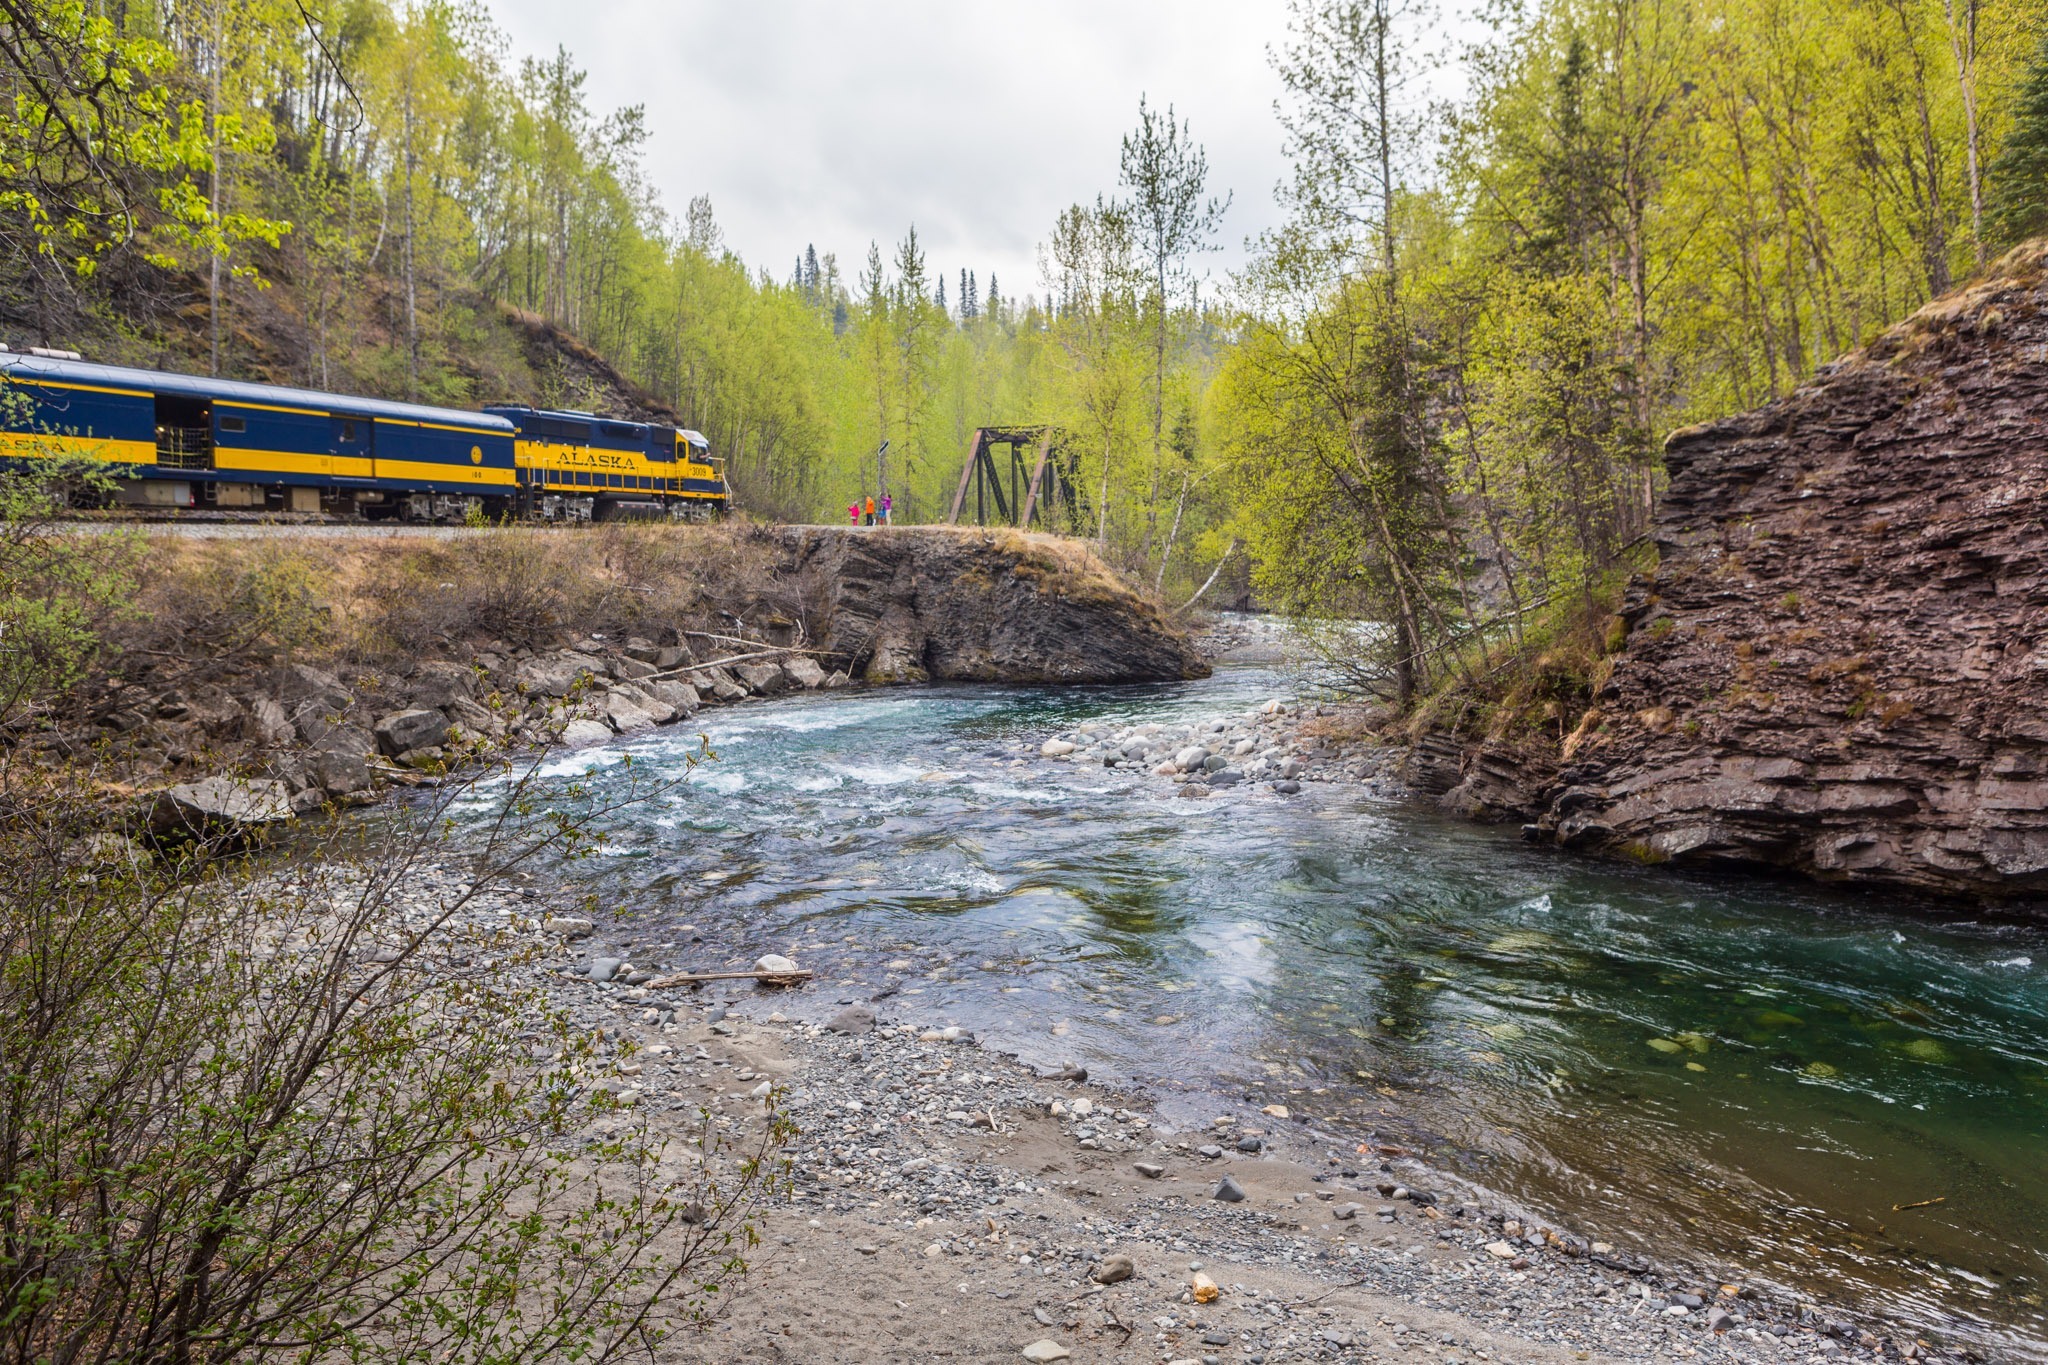 An Alaska Railroad train passes by a river in a forest setting.